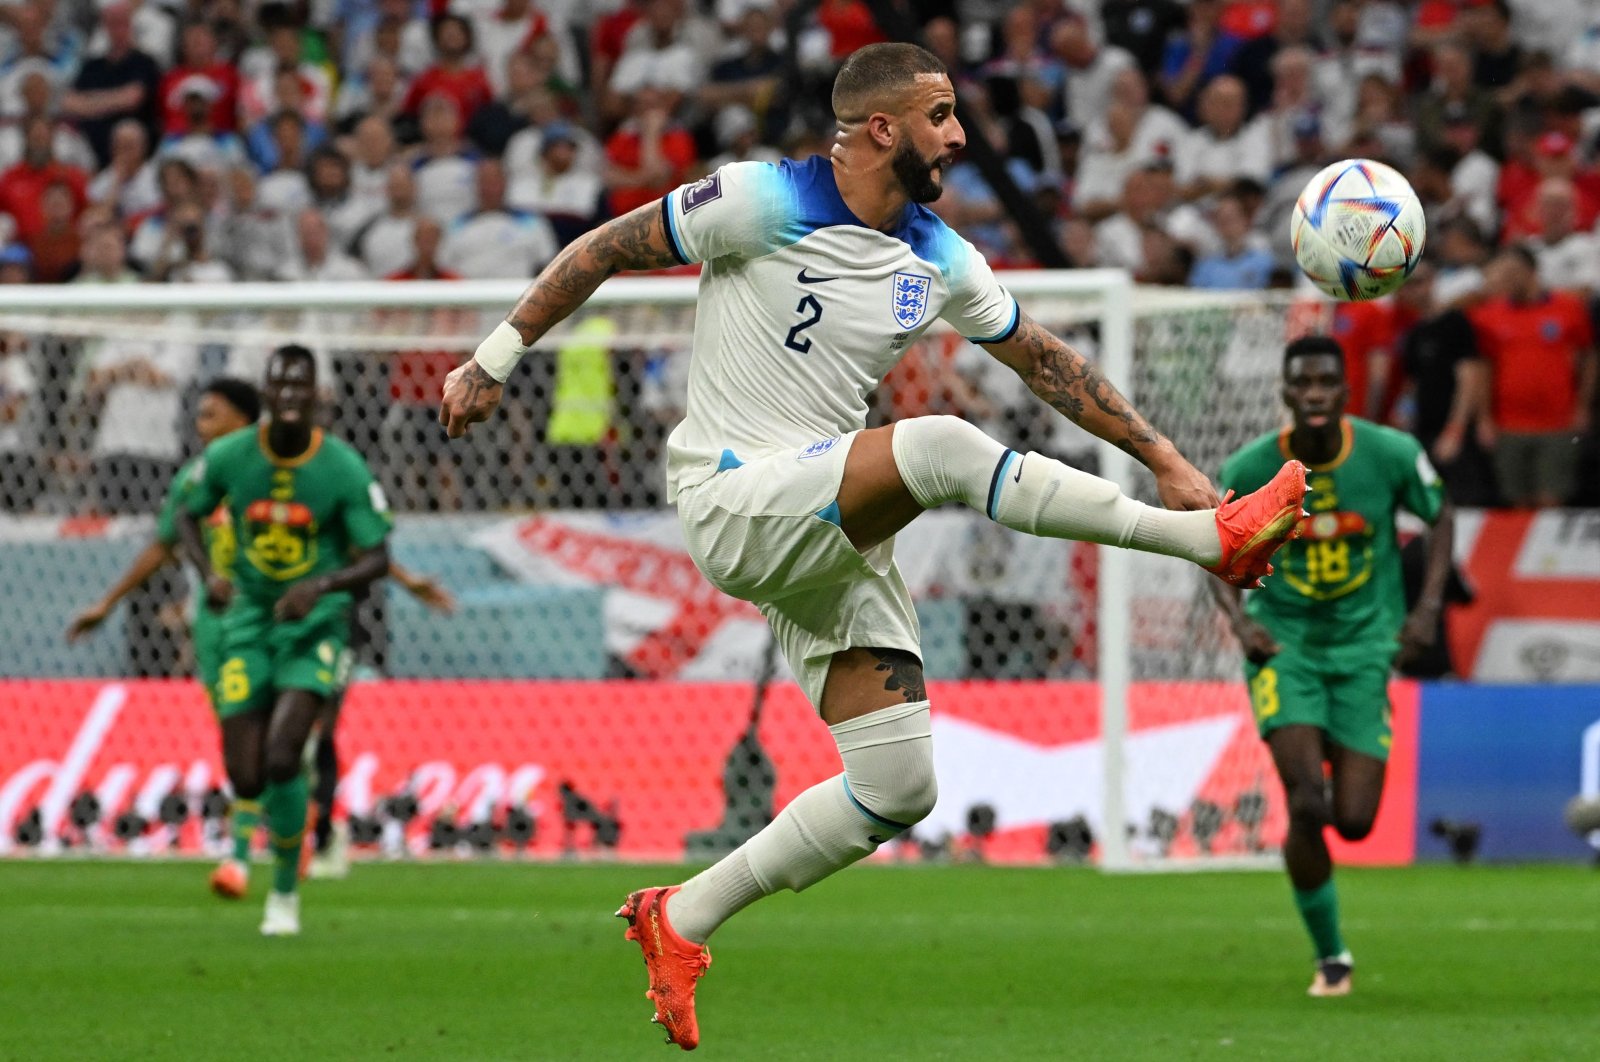 England defender Kyle Walker controls the ball during the Qatar 2022 World Cup round of 16 football match between England and Senegal at the Al-Bayt Stadium, Al Khor, Doha, Dec. 4, 2022. (AFP Photo)